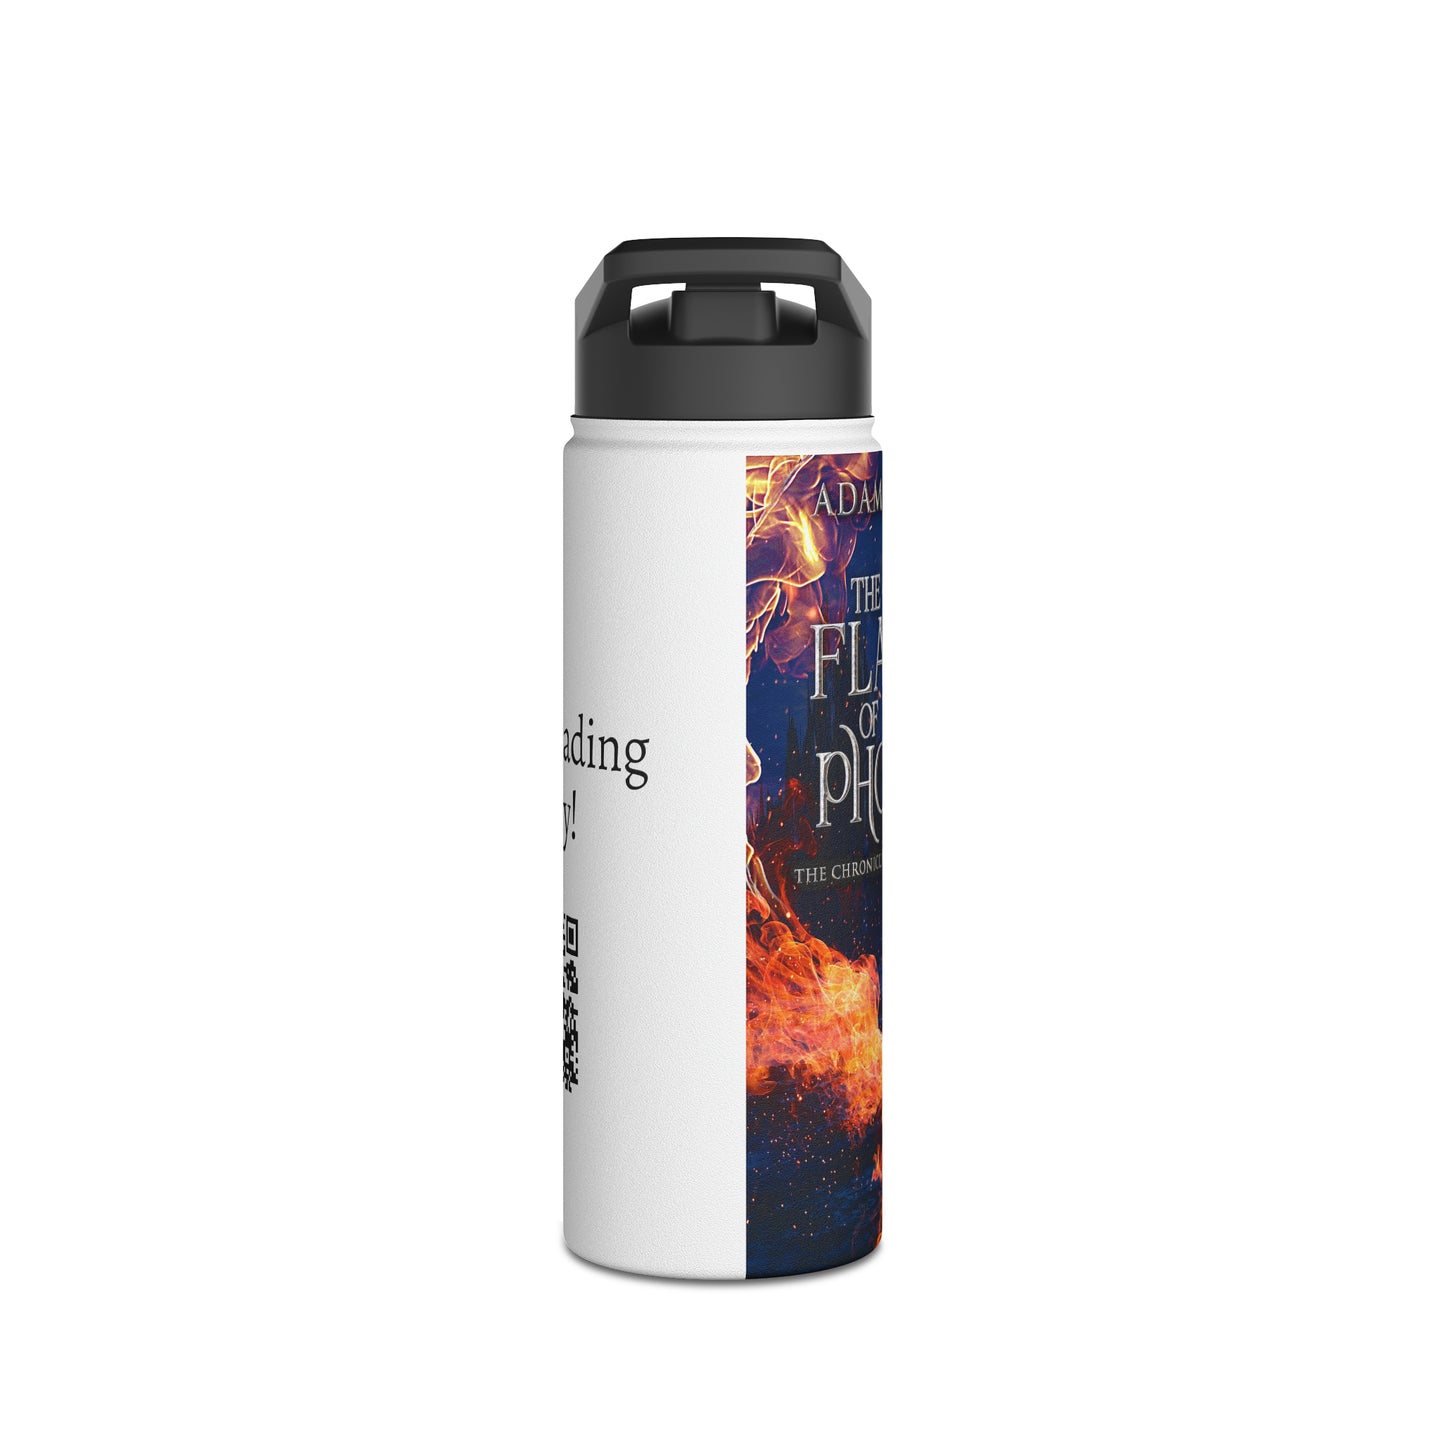 The Flames Of The Phoenix - Stainless Steel Water Bottle